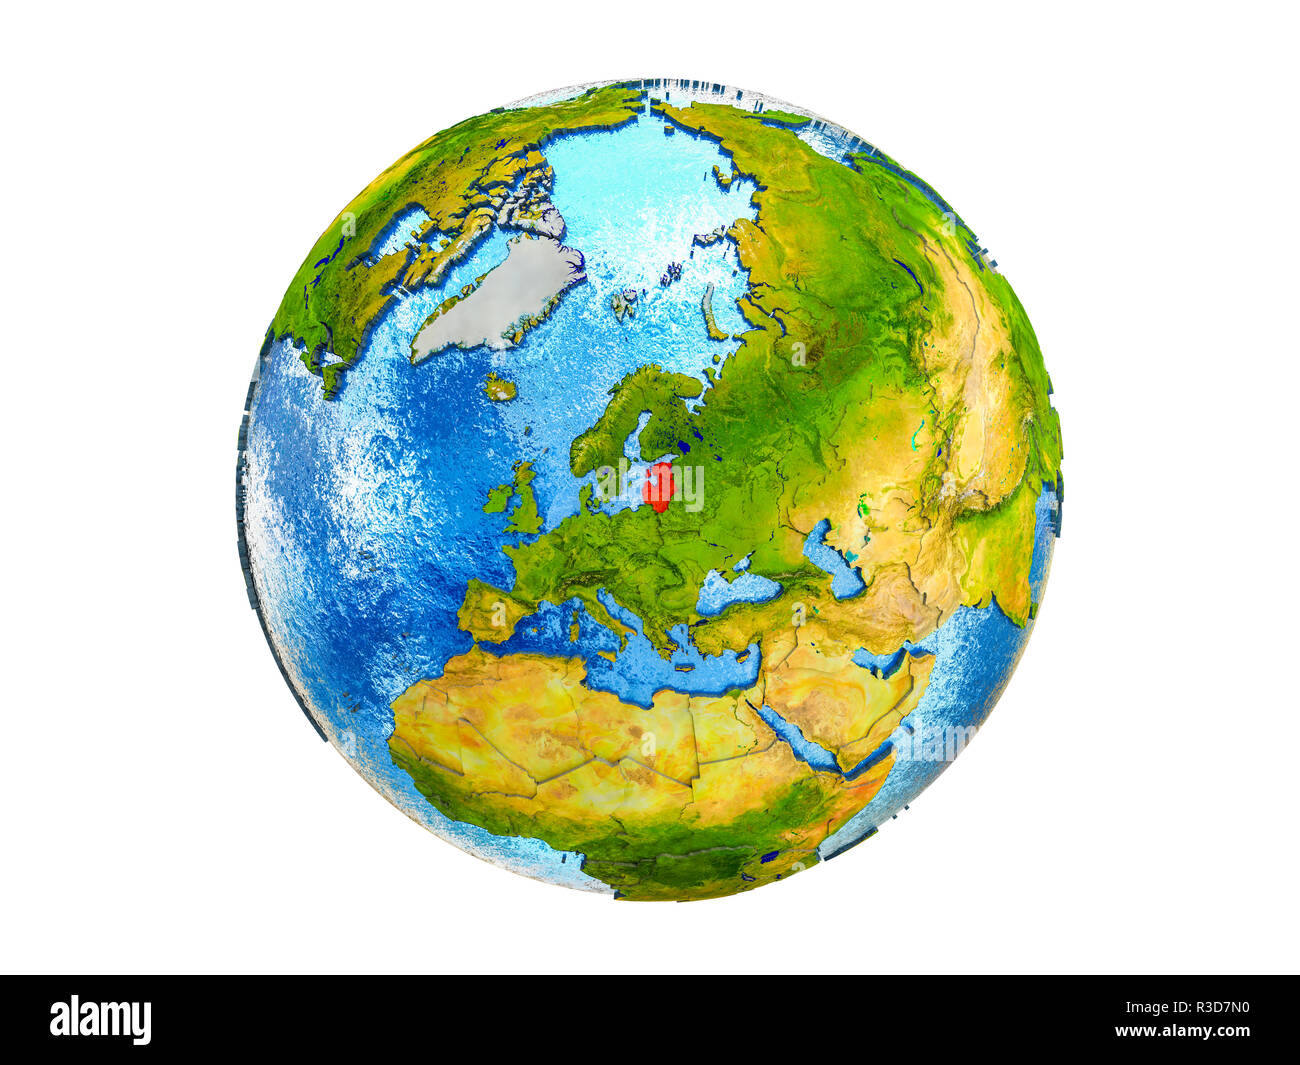 Baltic States on 3D model of Earth with country borders and water in oceans. 3D illustration isolated on white background. Stock Photo